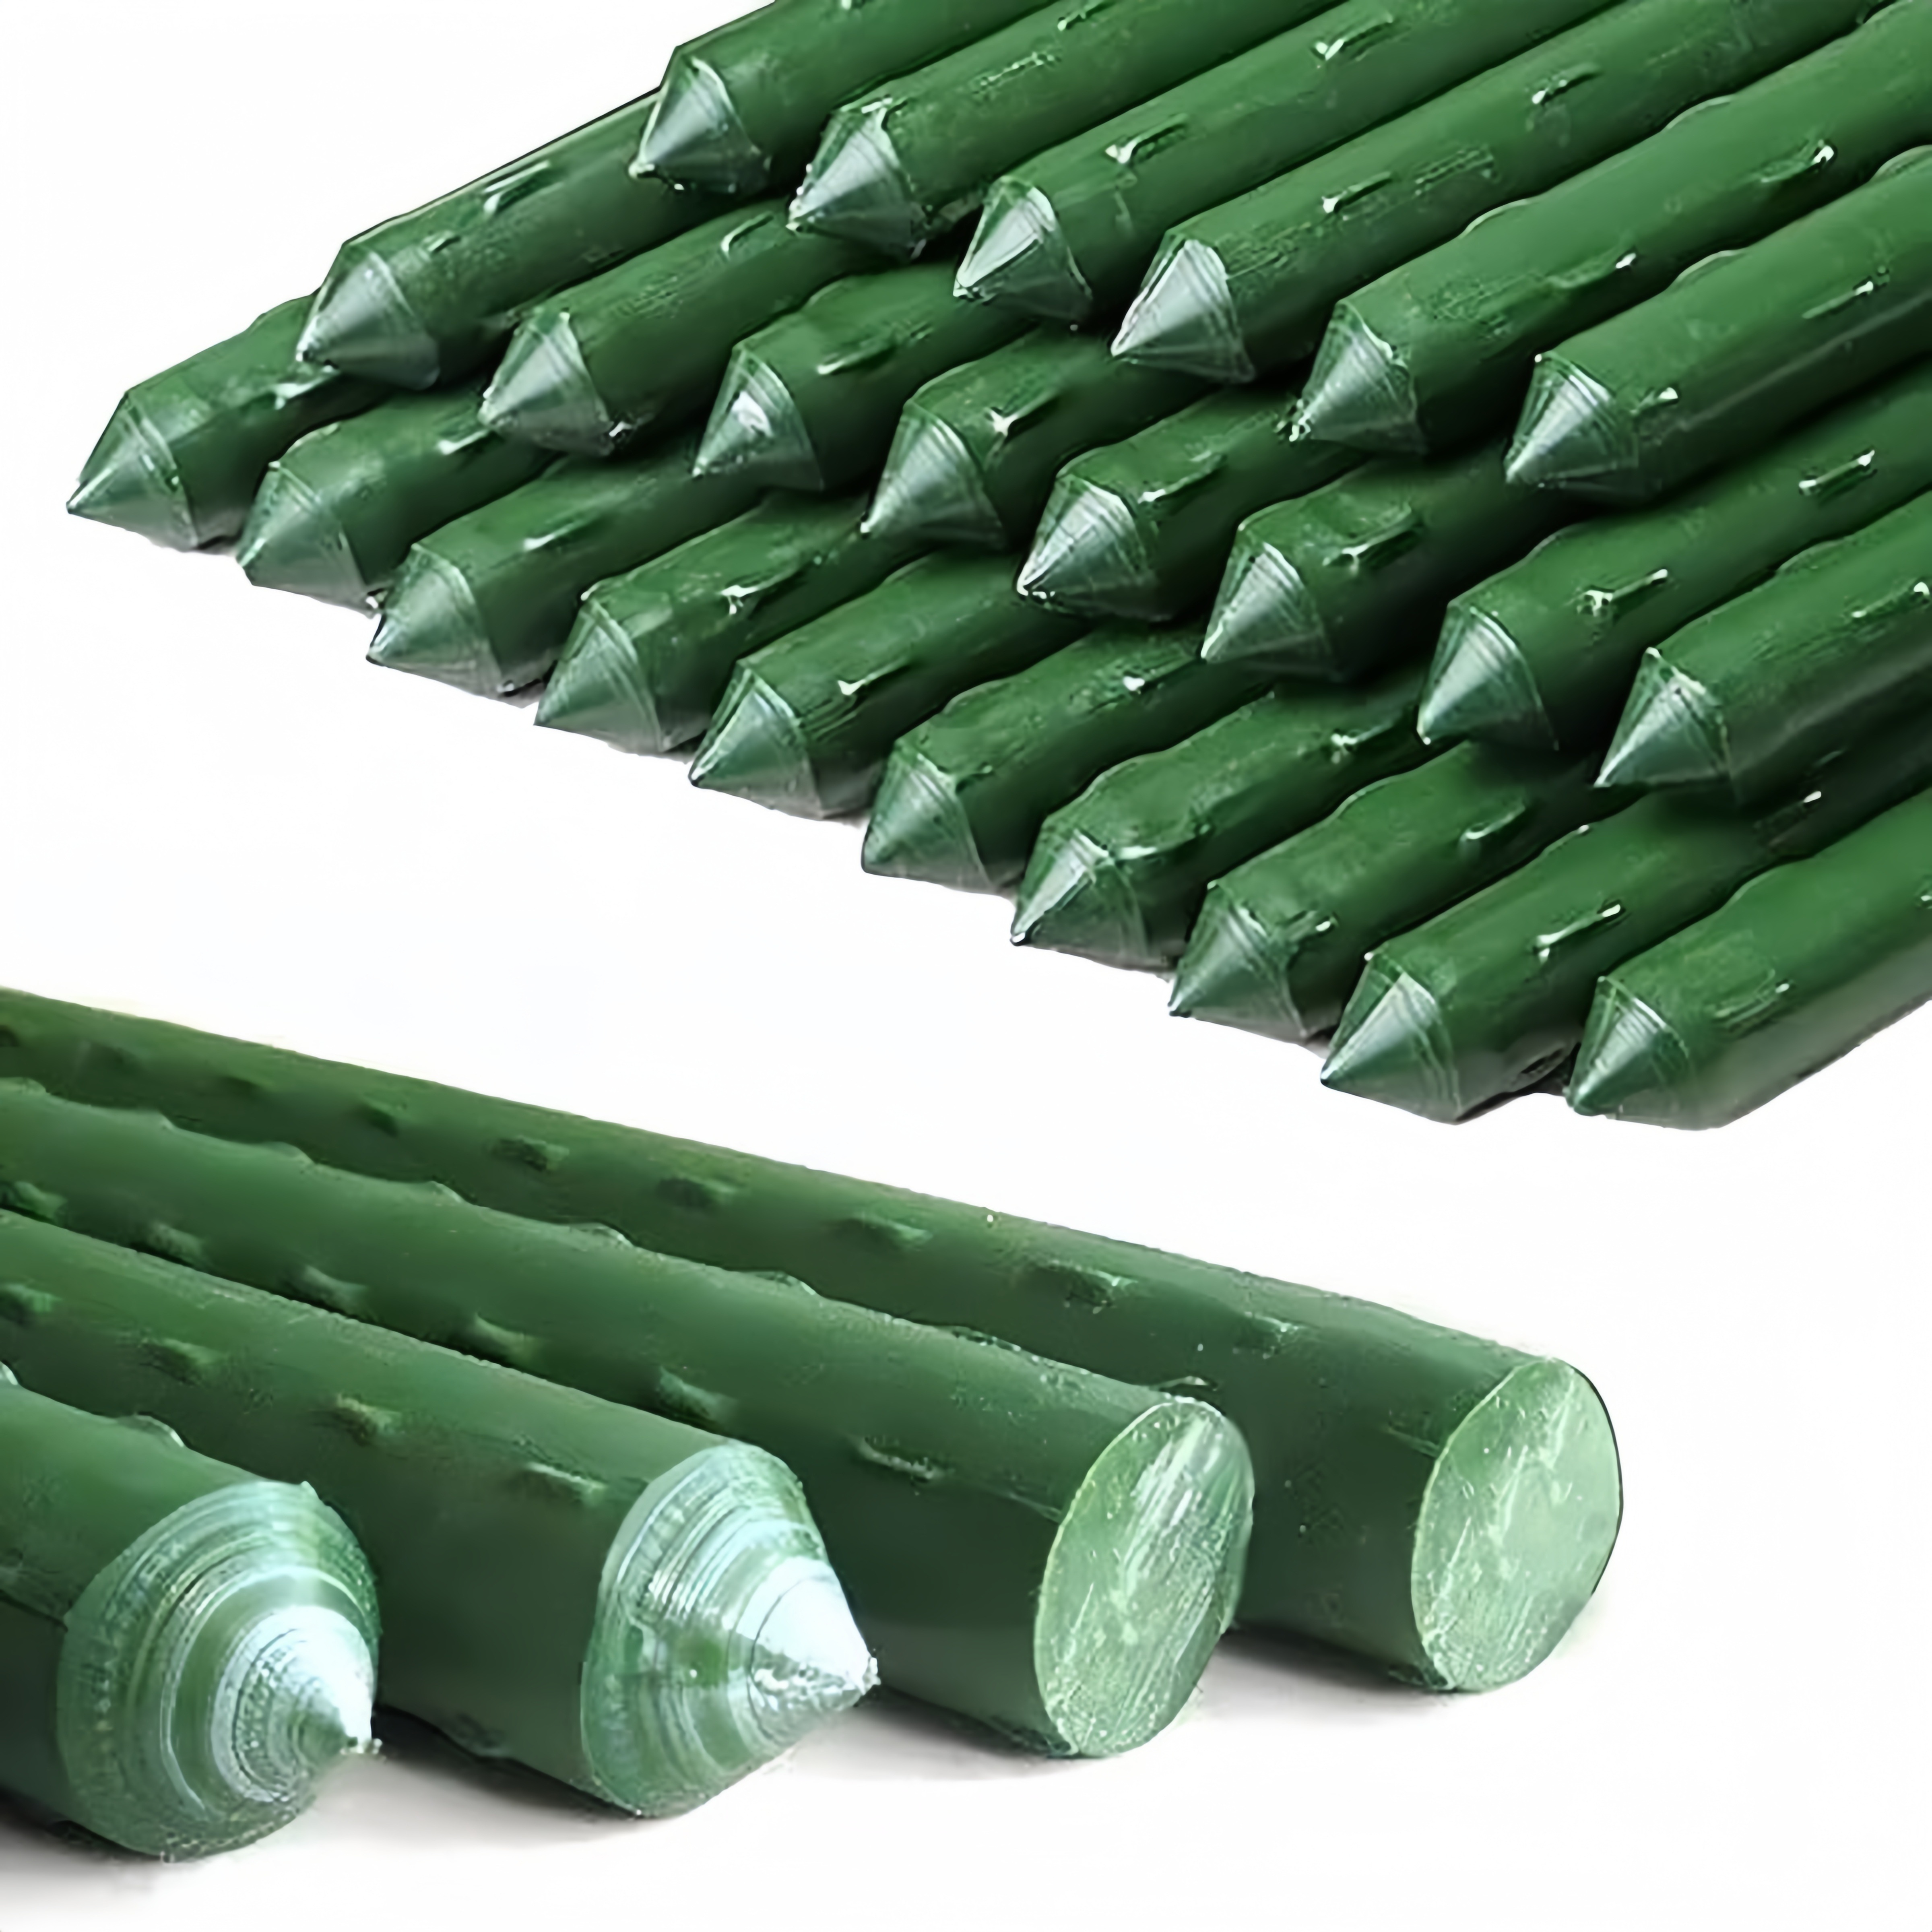 

14-pack Steel Garden Stakes For Plant Support, Plastic Coated Climbing Plant Trellis Sticks, 23.62" Green Tomato Stakes For Supporting Beans, Cucumbers, Trellising Flower Vines & Saplings